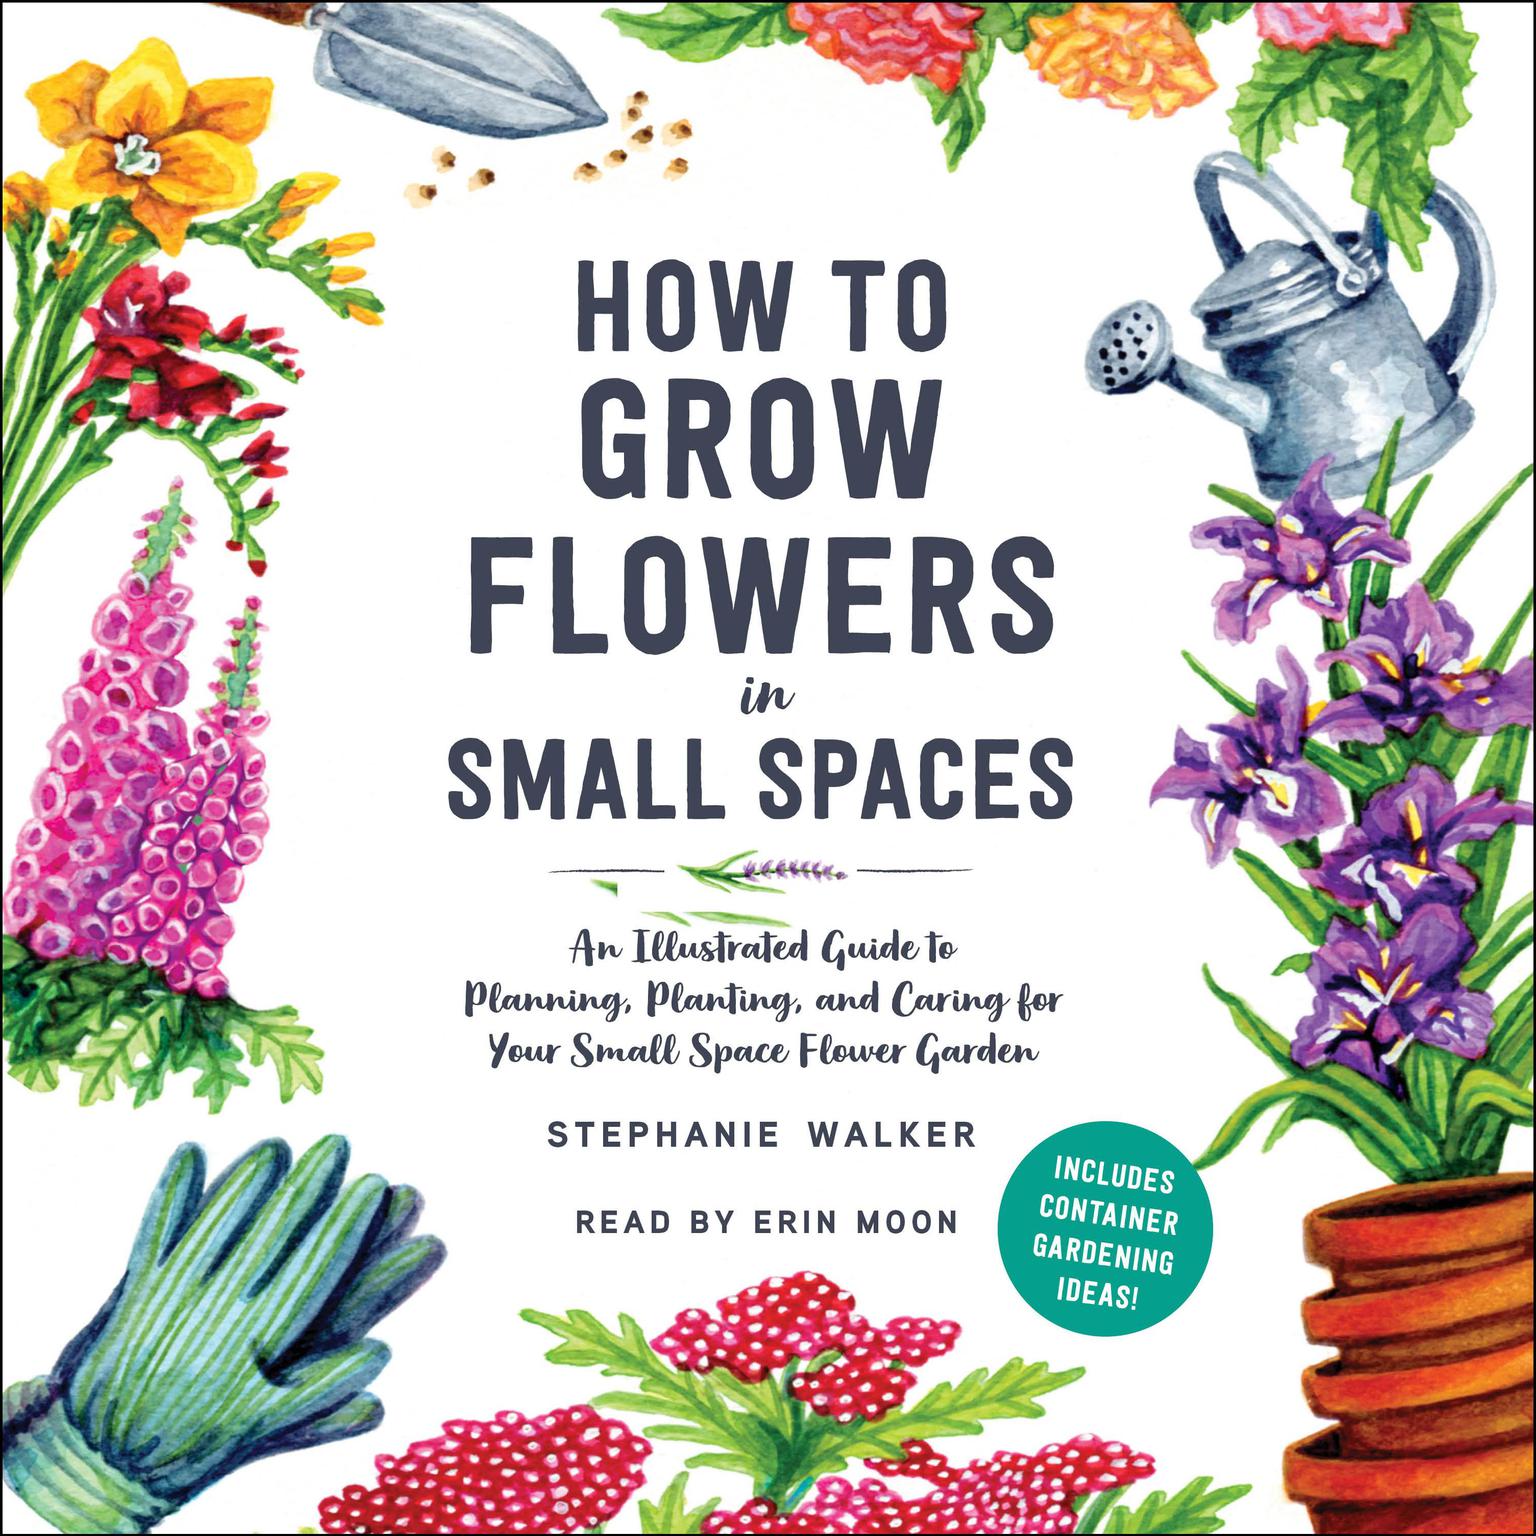 How to Grow Flowers in Small Spaces: An Illustrated Guide to Planning, Planting, and Caring for Your Small Space Flower Garden Audiobook, by Stephanie Walker